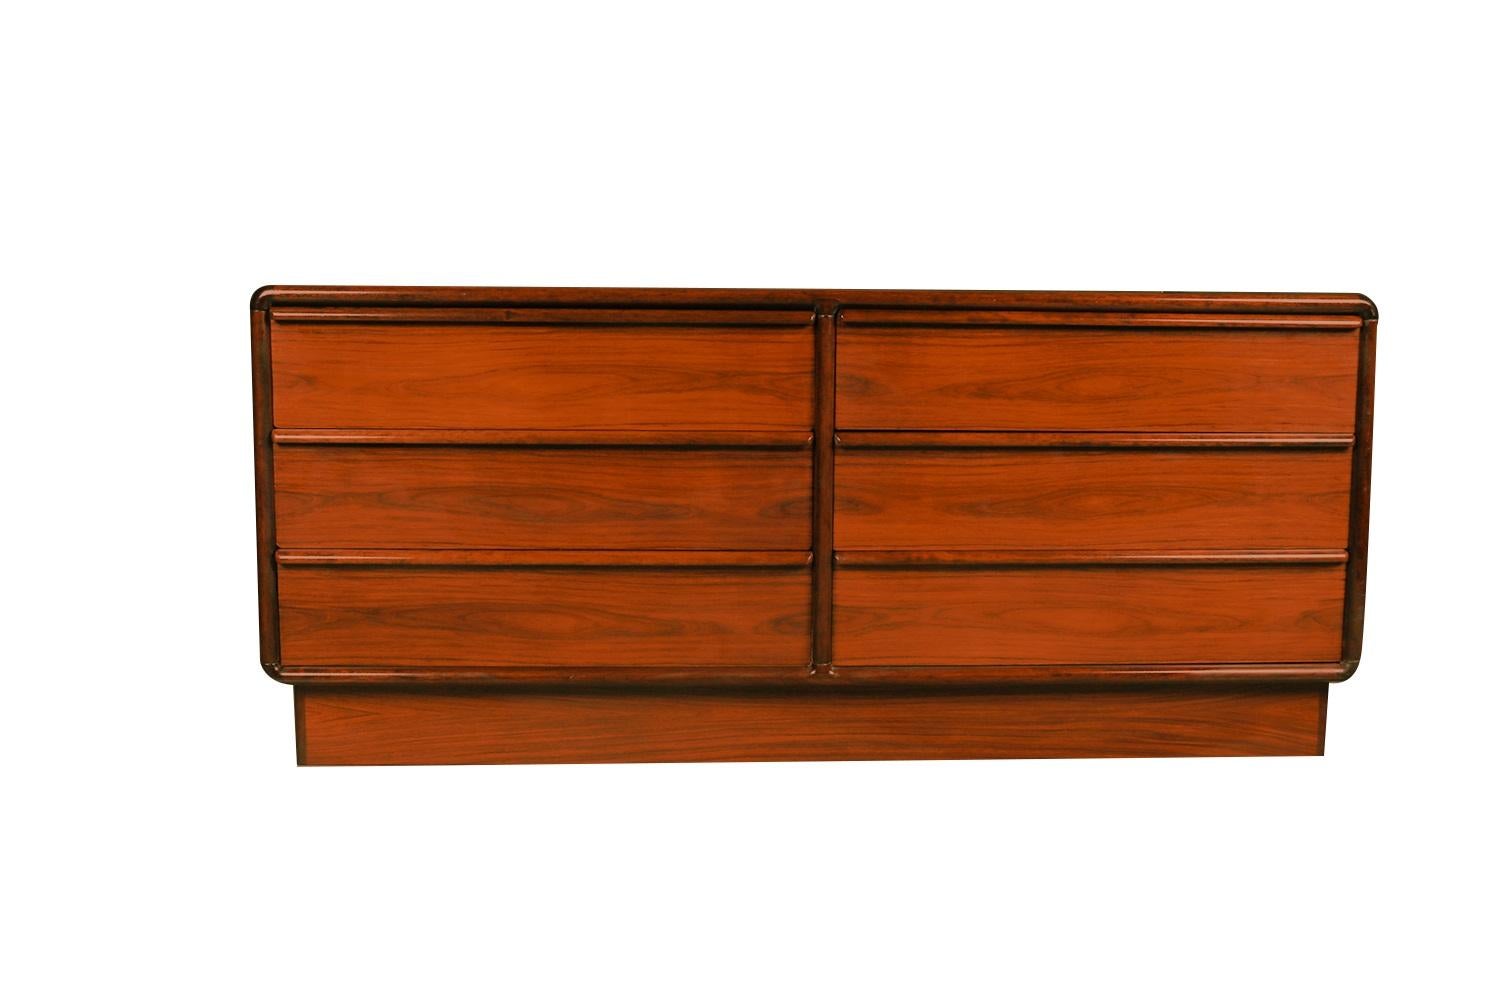 A stunning double rosewood dresser by Kibaek Mobelfabrik, made in Denmark, circa 1960s. This Danish mid century modern rosewood double dresser with six drawers is minimalist in style, with beautifully embellished bands of Rosewood running